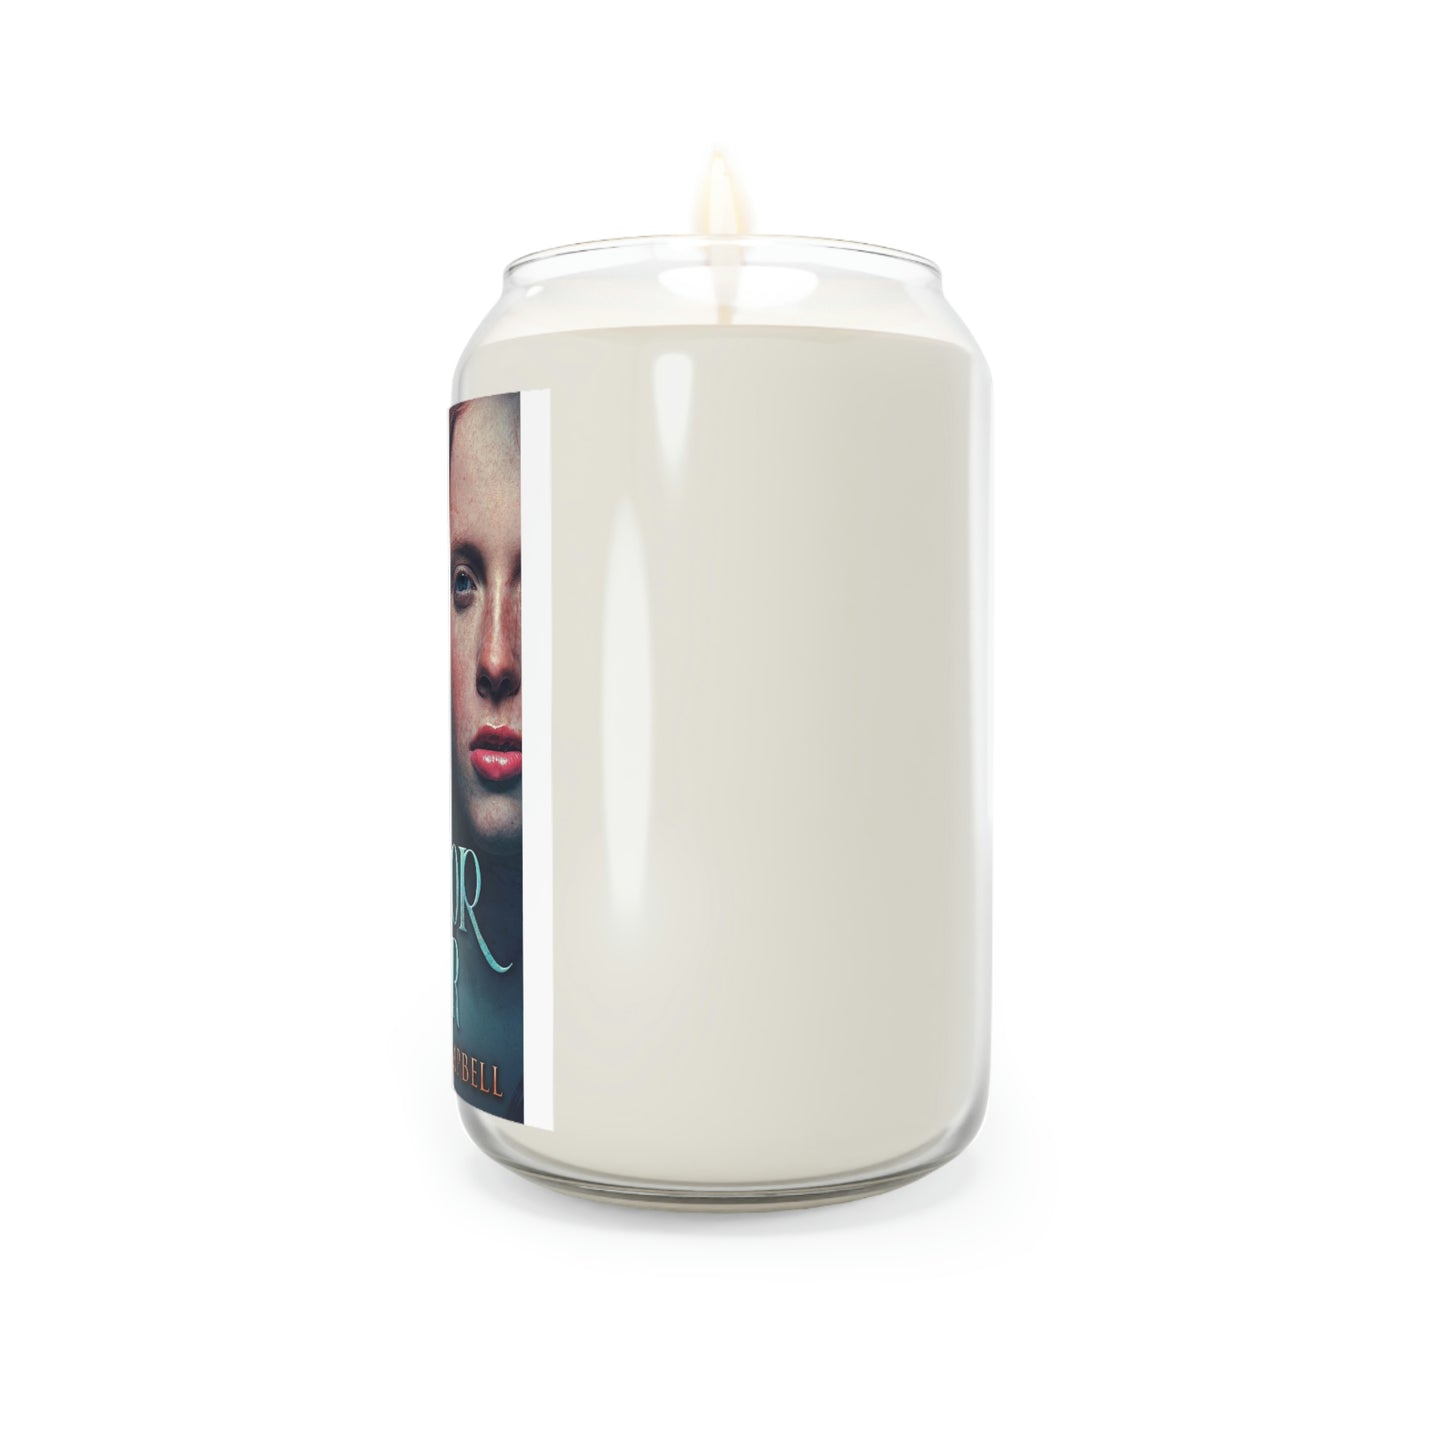 A Warrior For Her - Scented Candle